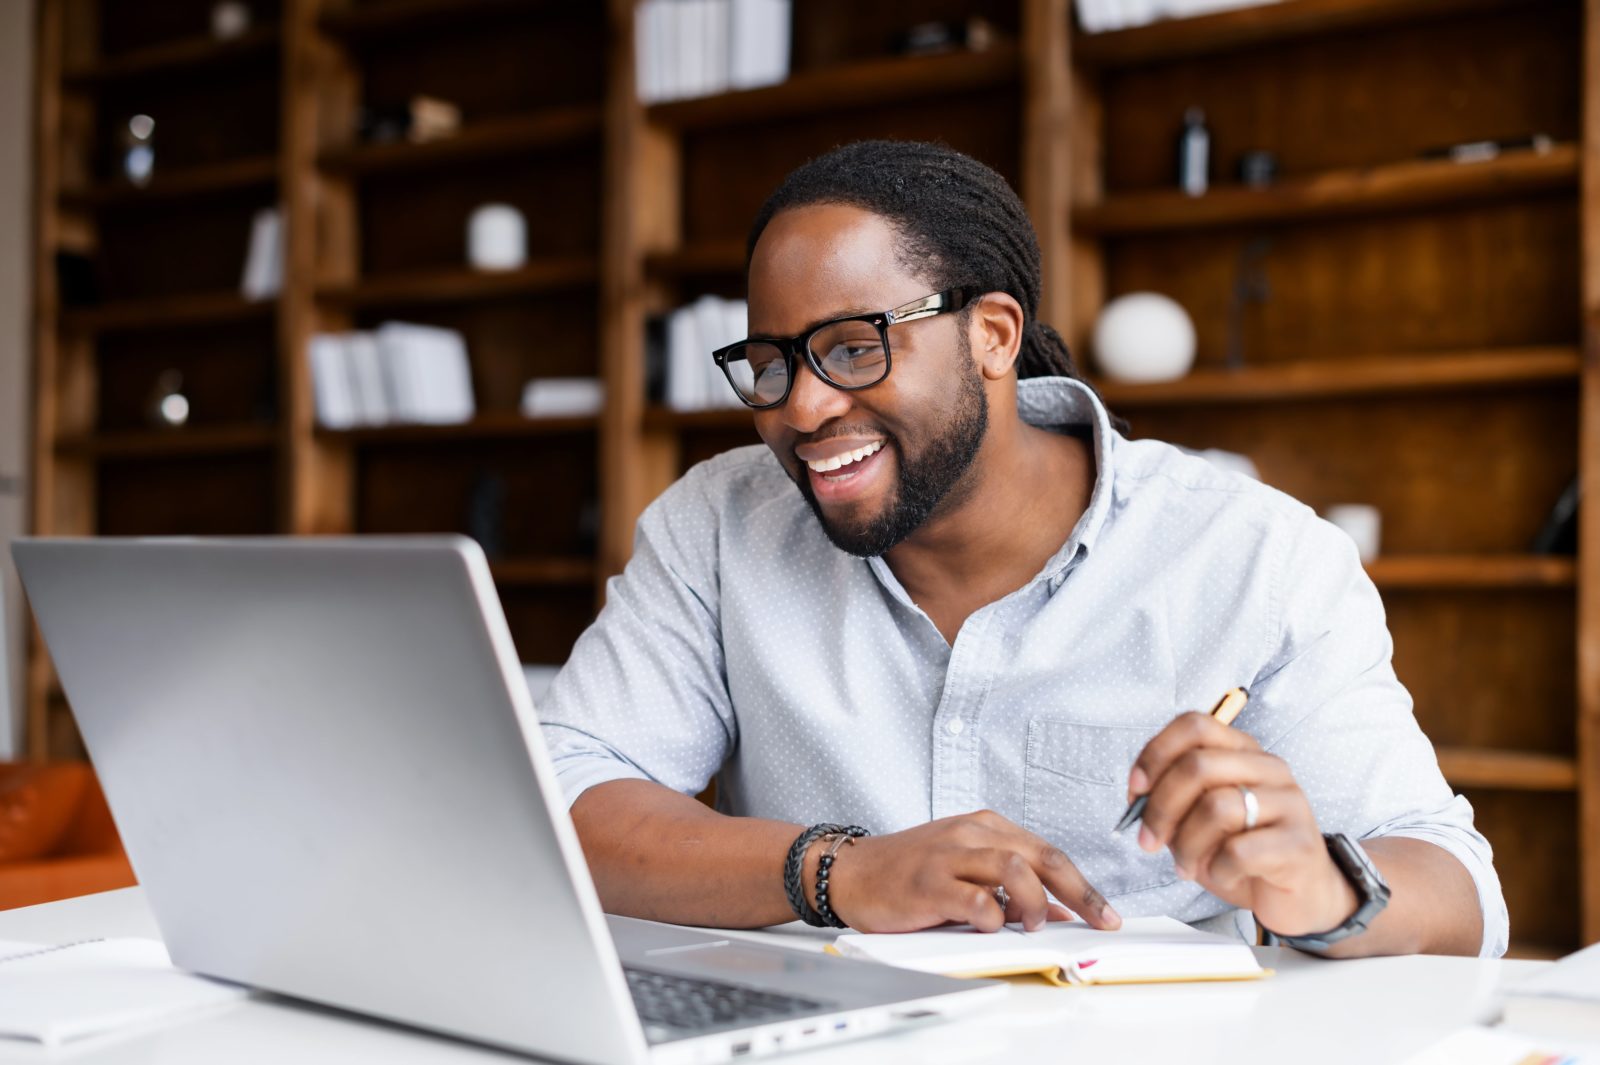 This image depicts a smiling man with long dark hair smiling at his laptop—choosing a nonprofit CRM may be a big decision for him, but this guide is making it a little easier